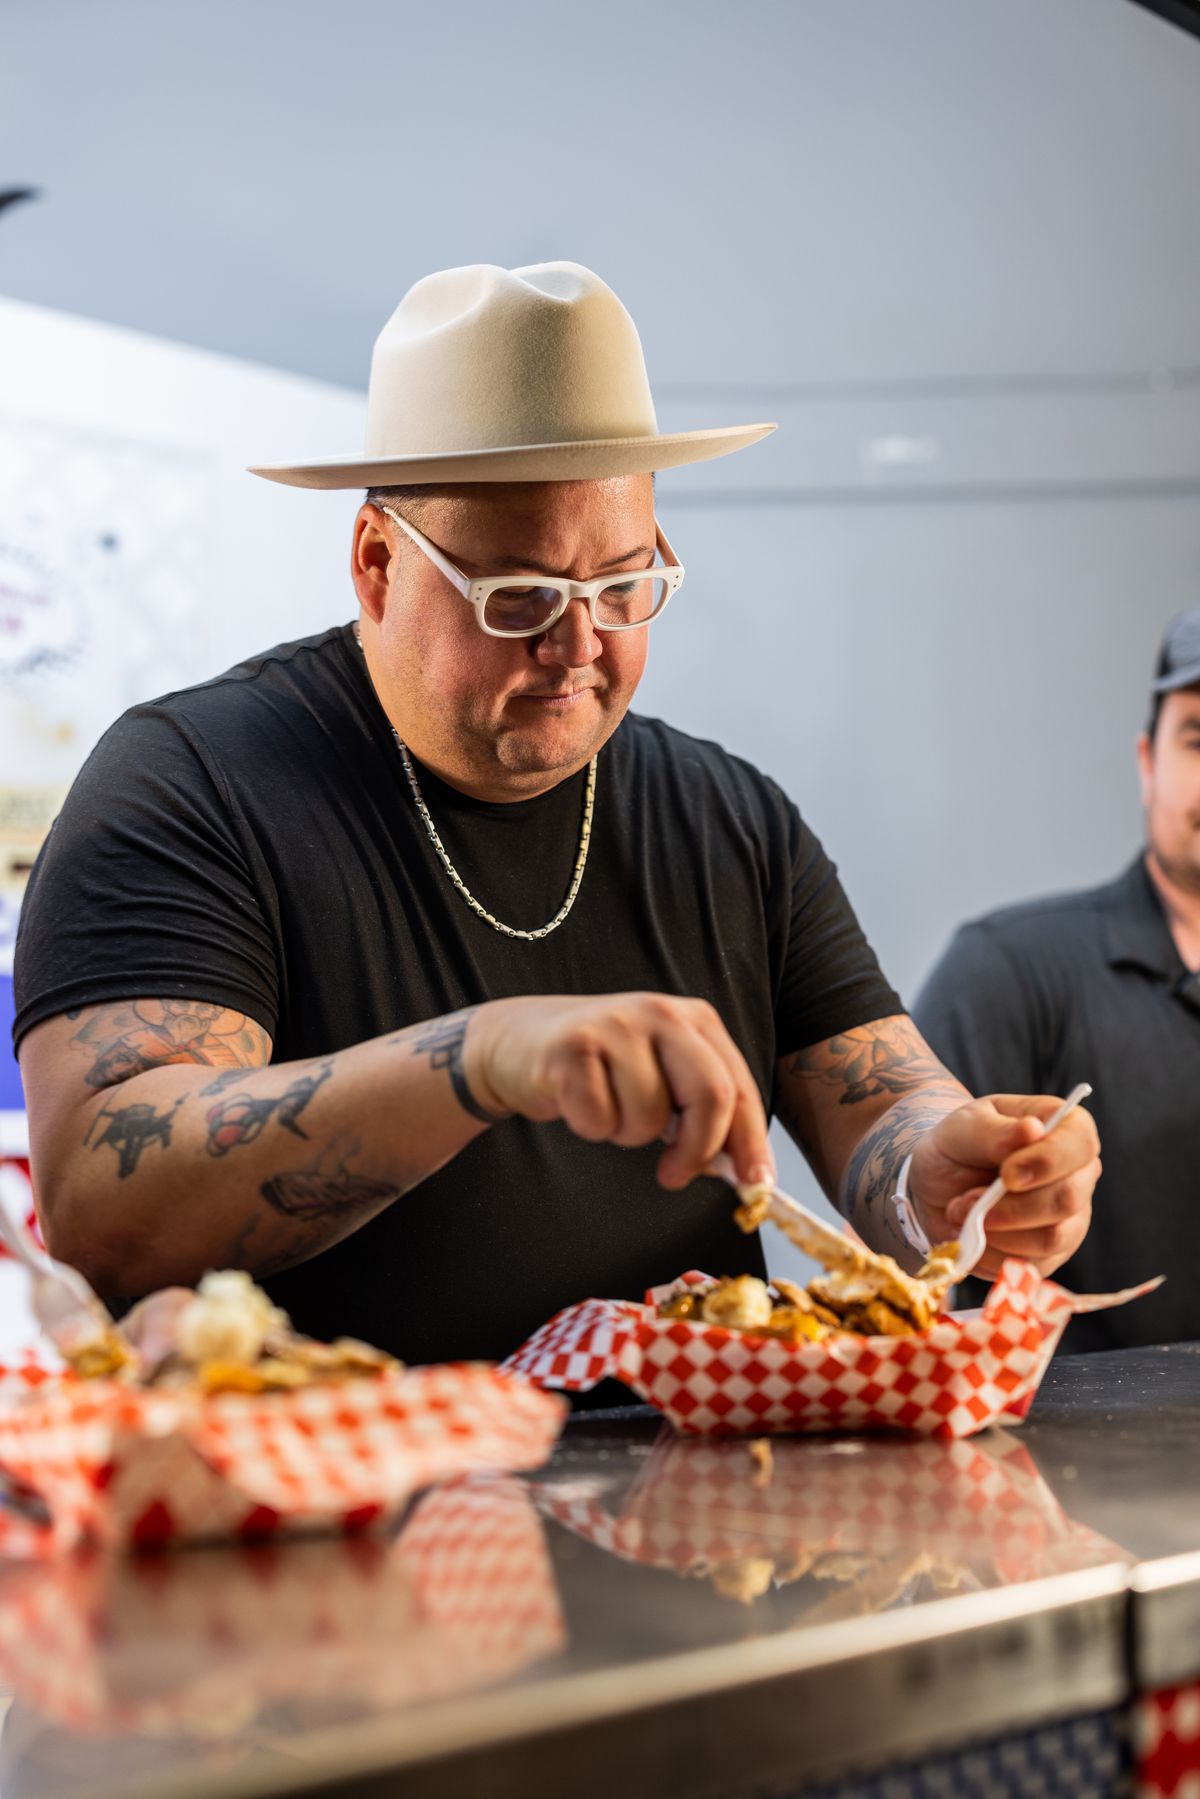 Celebrity chef Graham Elliot looks serious as he uses a fork and knife to eat a dessert at the state fair. Another man is half in the frame to his right, also looking serious.